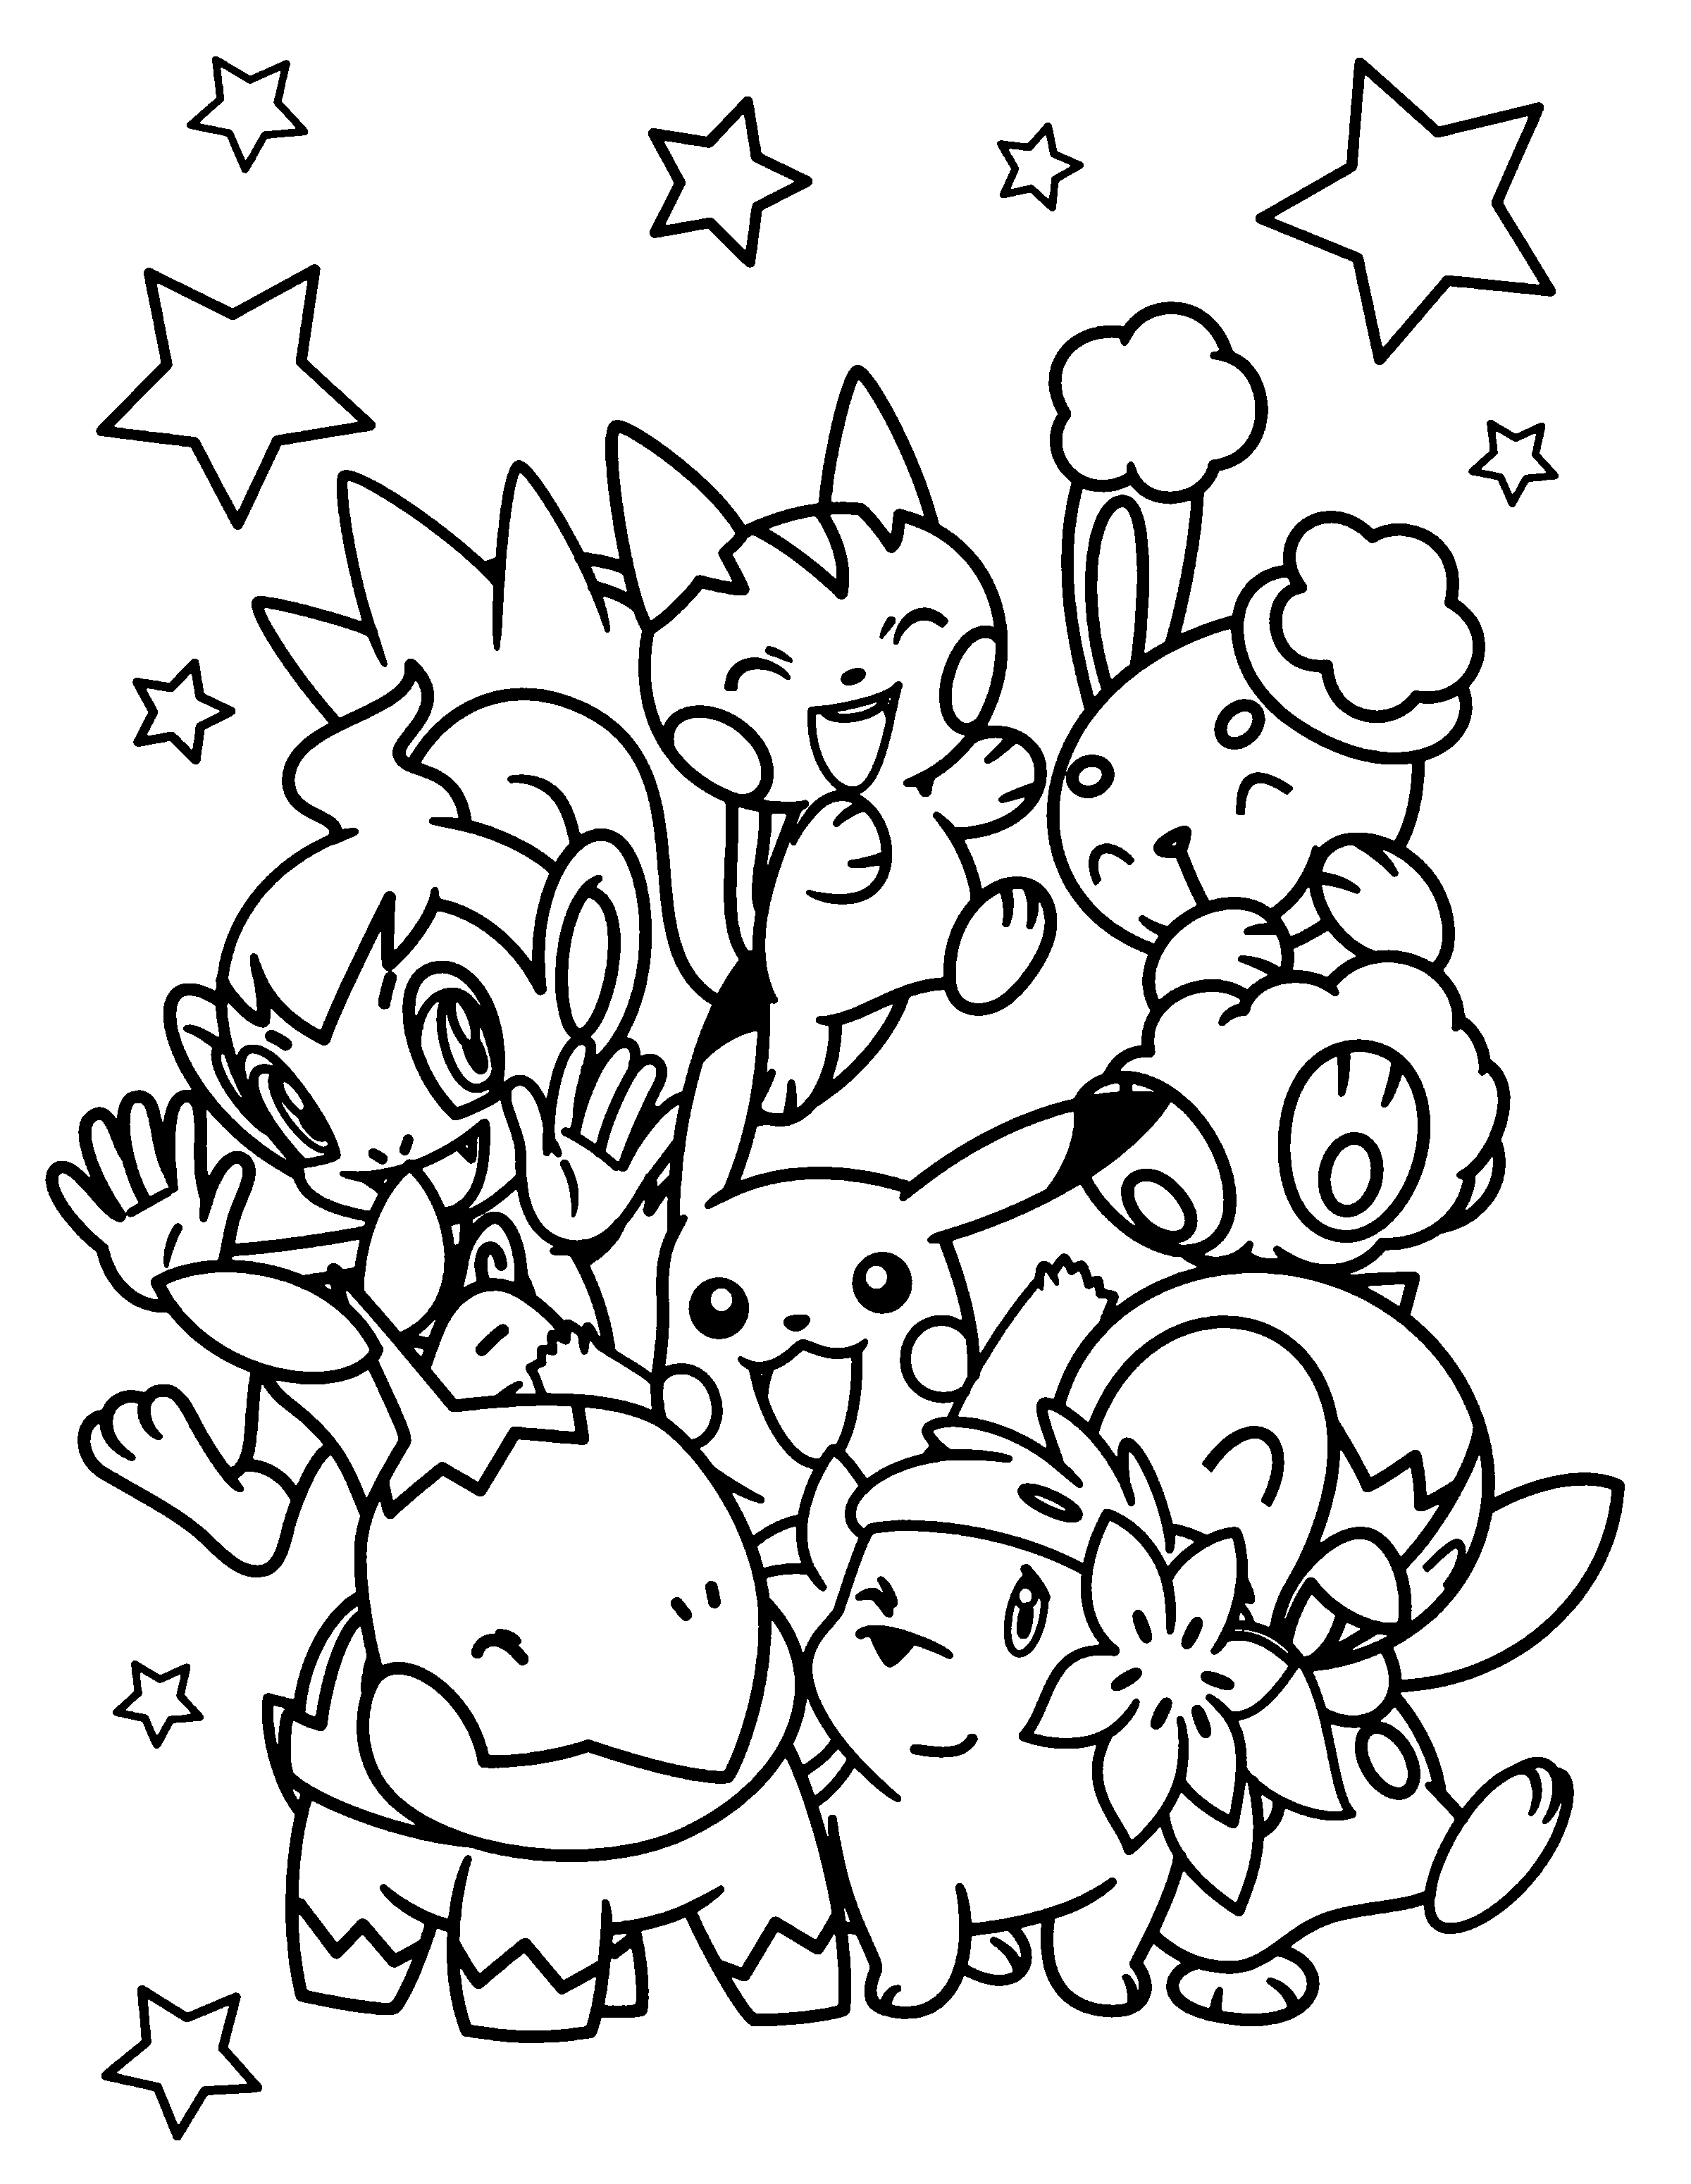 Pokemon free to color for kids - All Pokemon coloring pages Kids ...